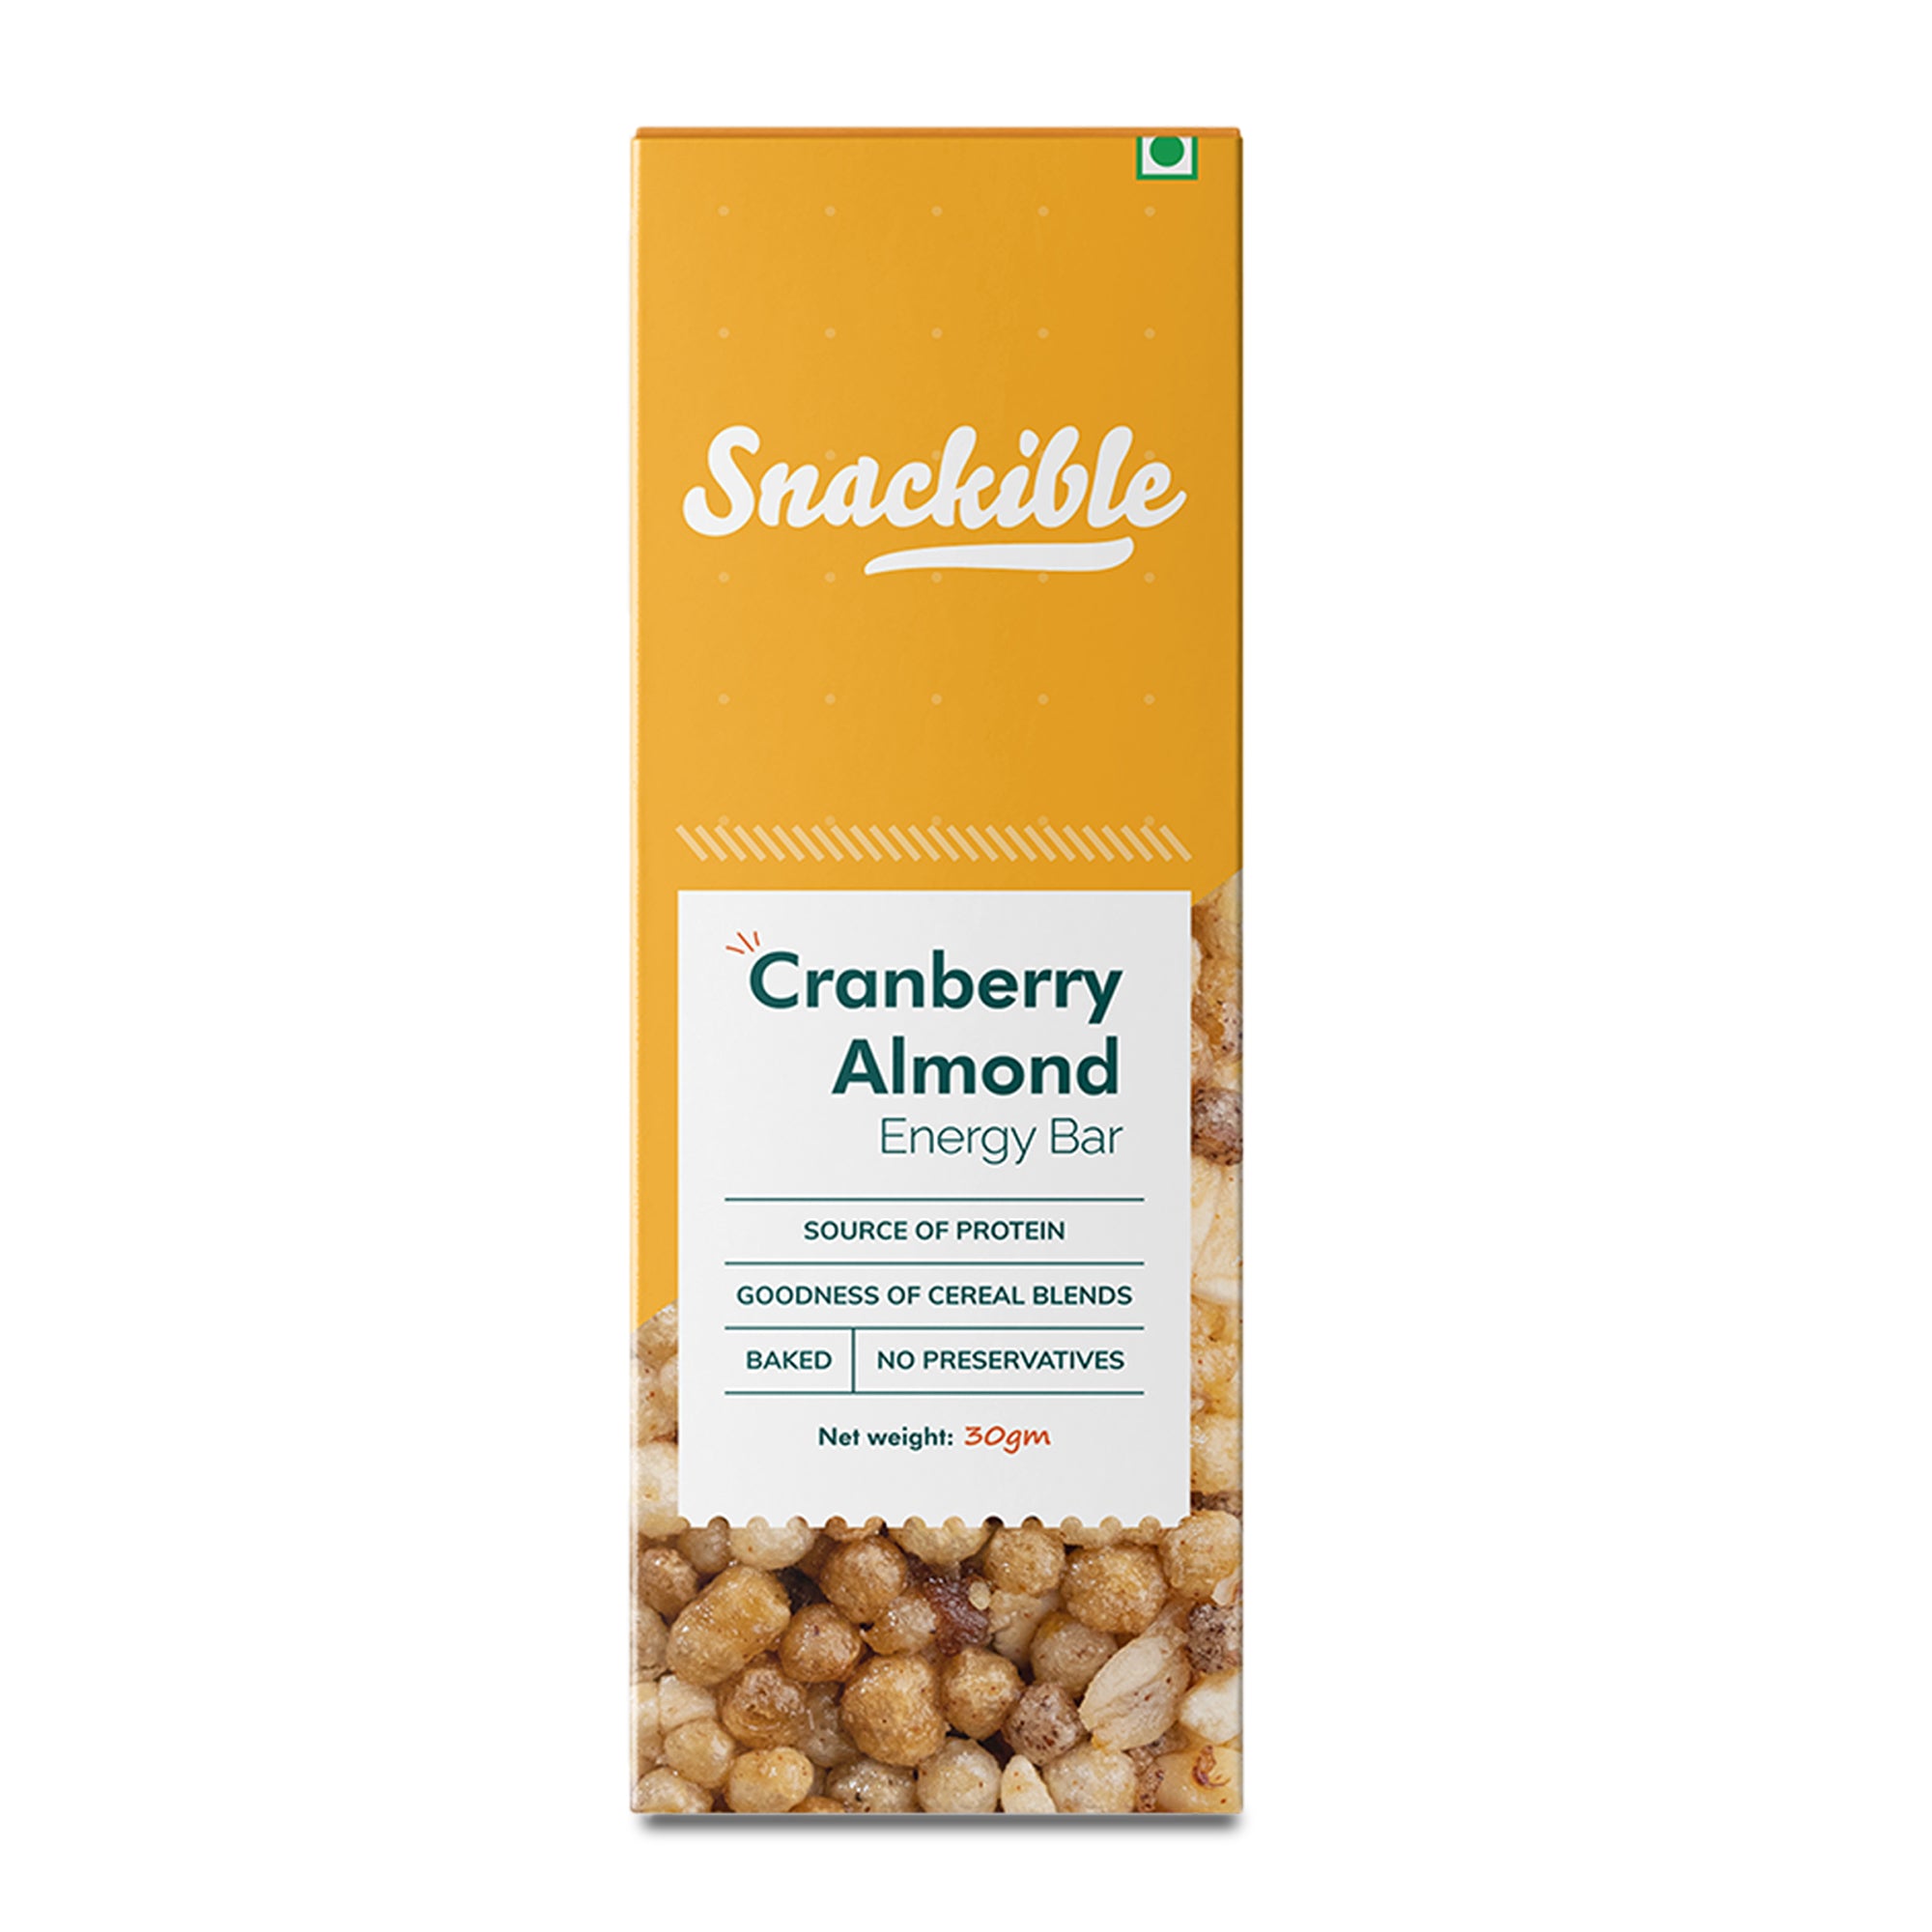 Snackible Cranberry Almond Energy Bar - 30gm | Pack of 4